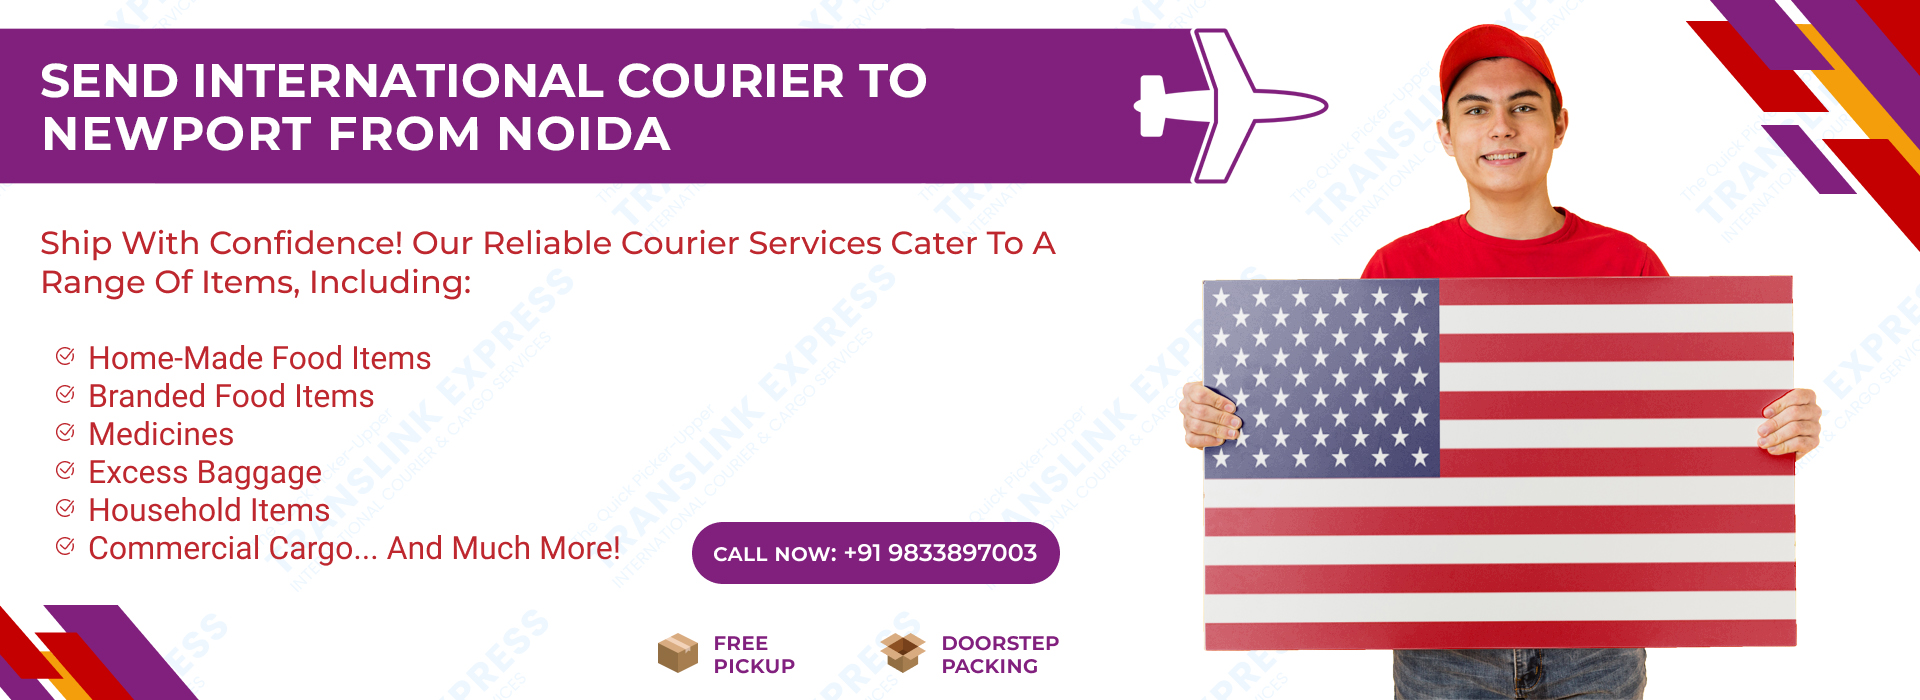 Courier to Newport From Noida